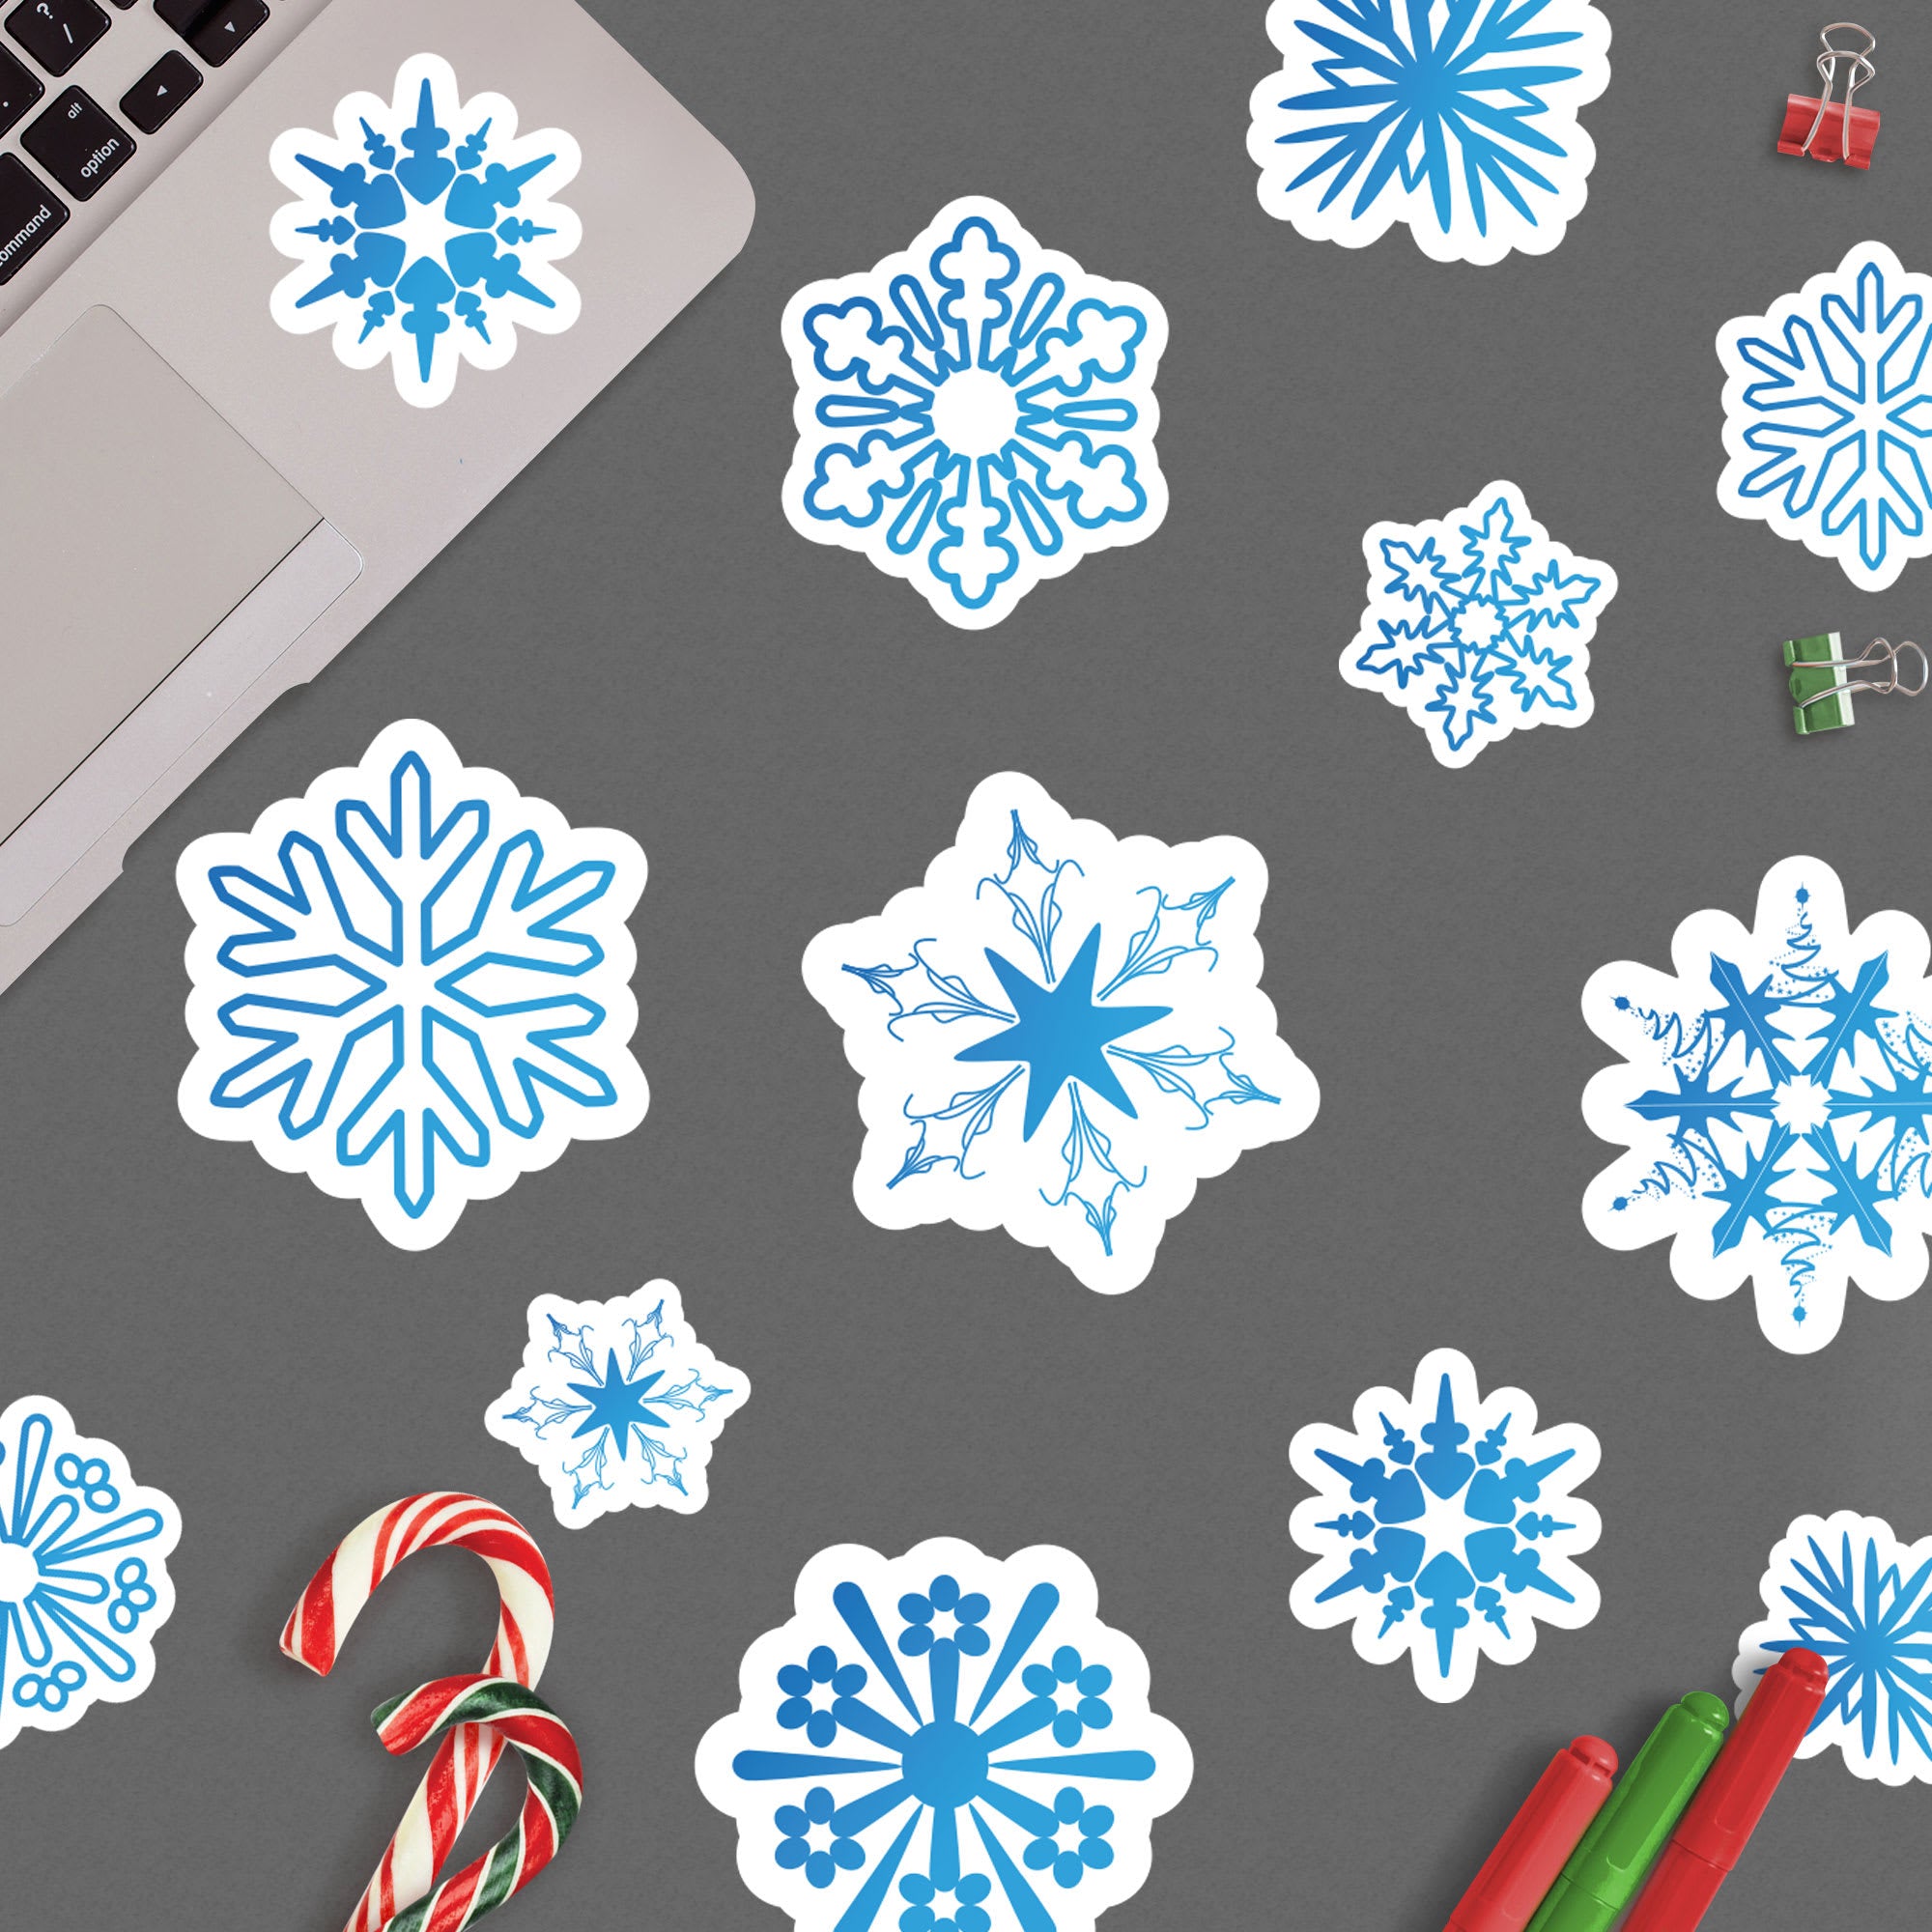 Snowflake: Paper Collection - Removable Vinyl Decal 12.0"W x 17.0"H by Fathead